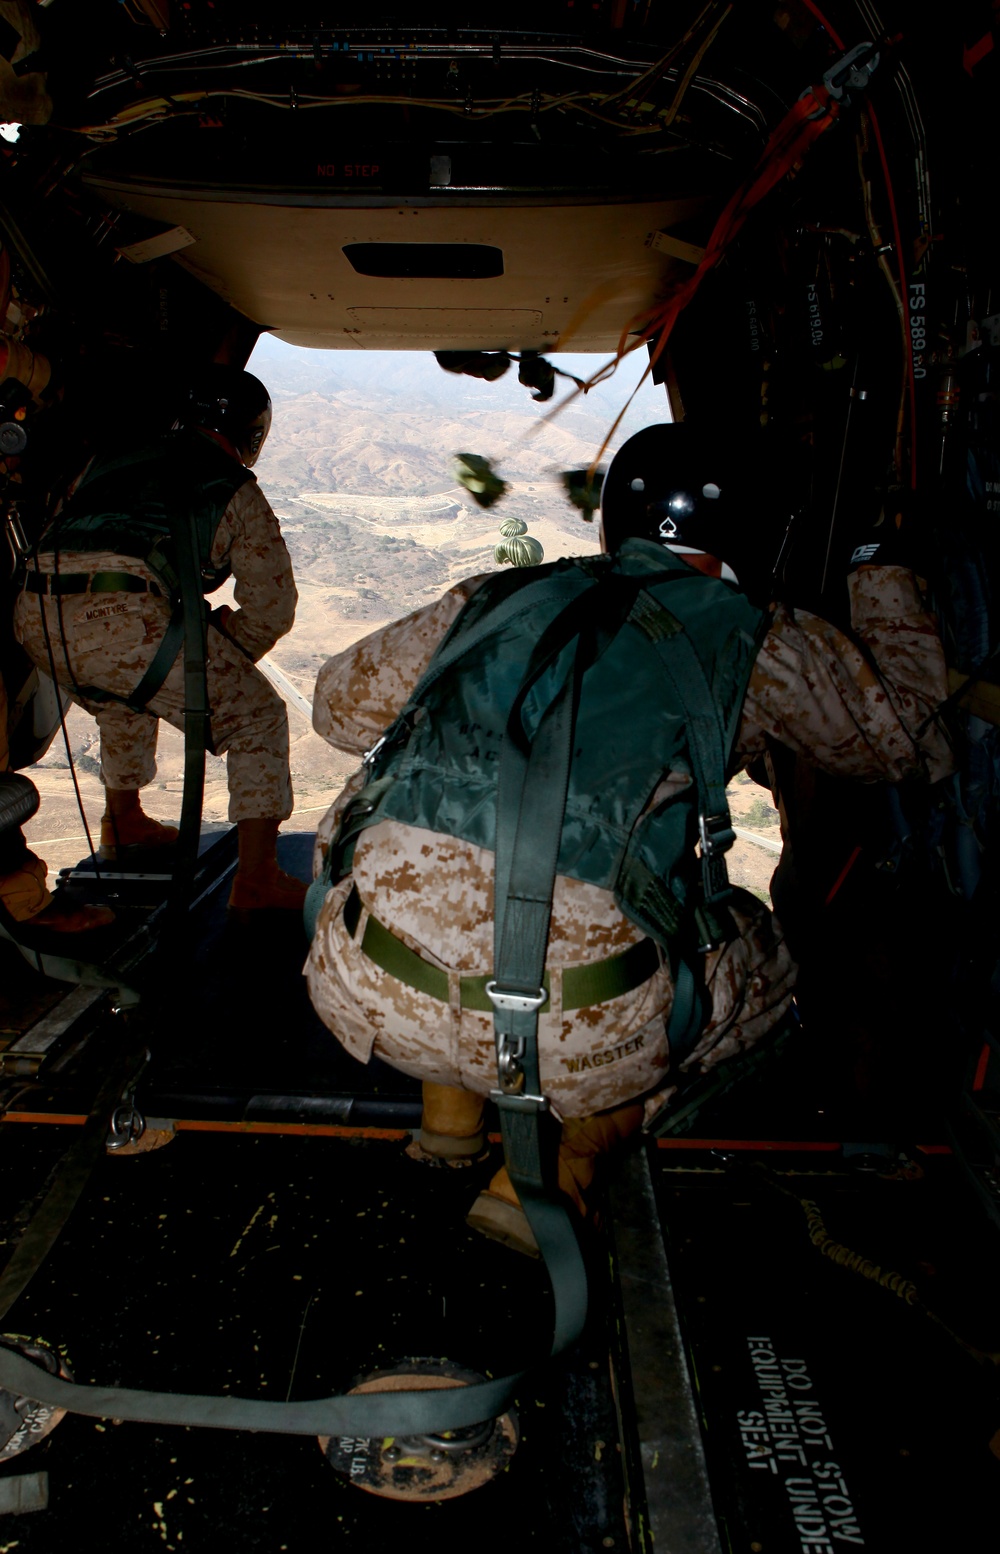 Into the drop zone: ‘Greyhawks’ assist with parachute training